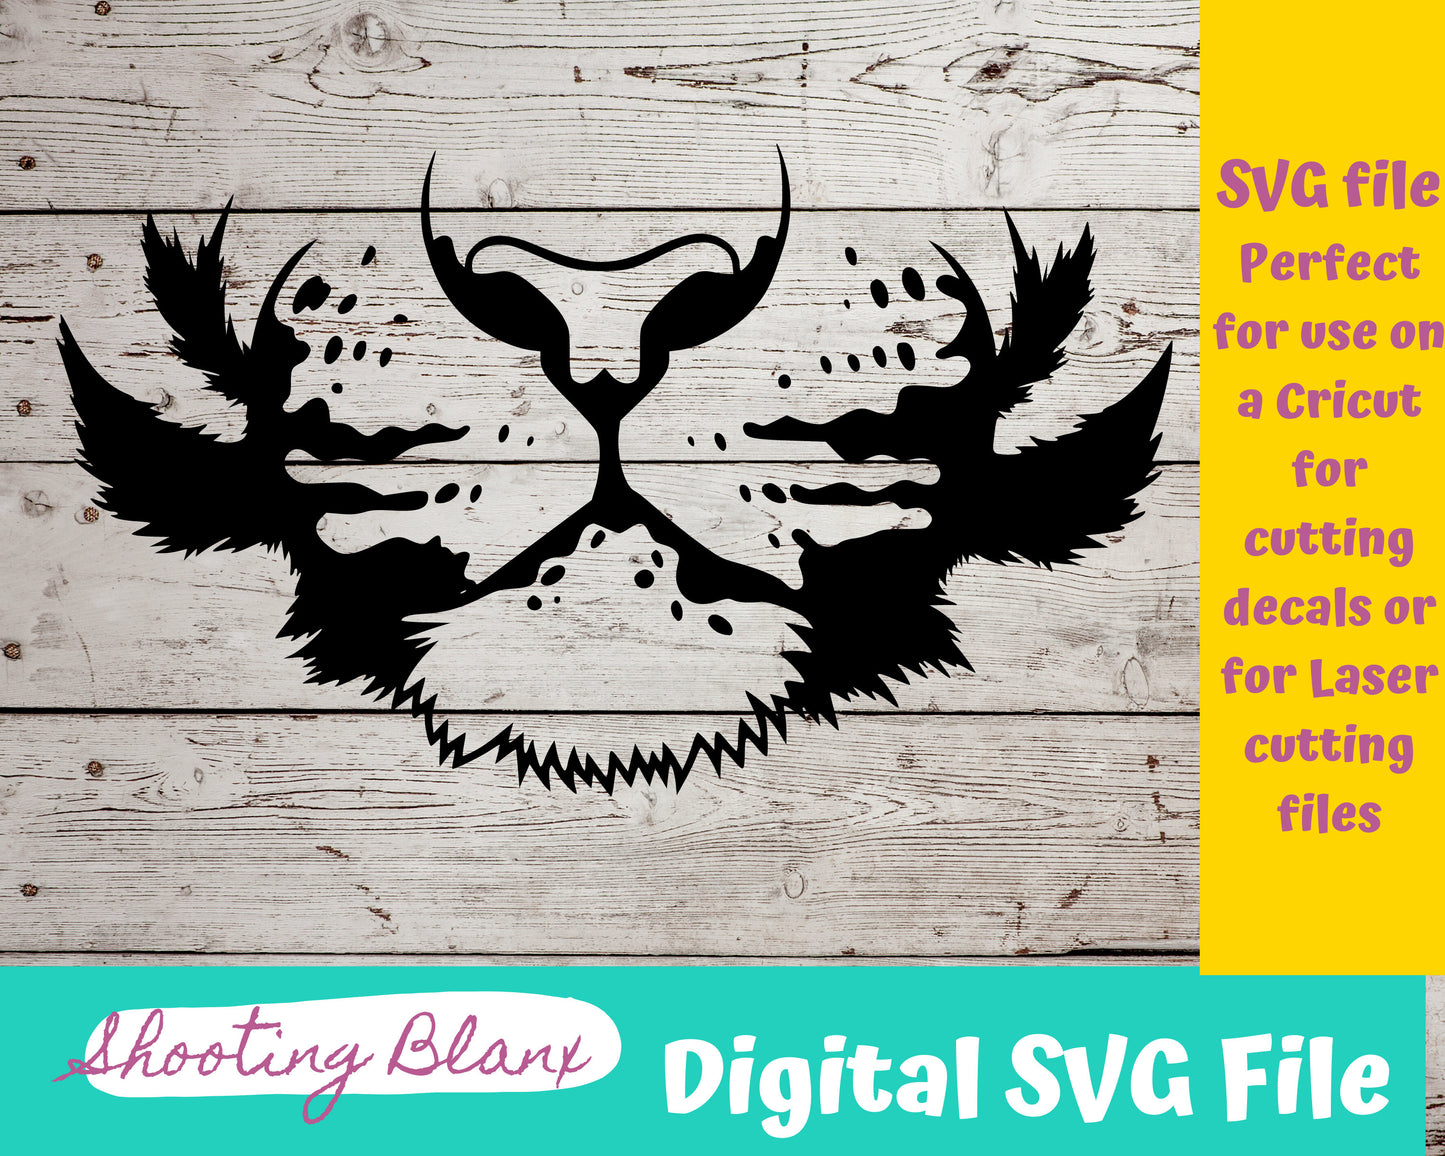 Pitbull Dog Mouth SVG file perfect for Cricut, Cameo, or Silhouette also for laser engraving Glowforge, half face, mask, sublimation